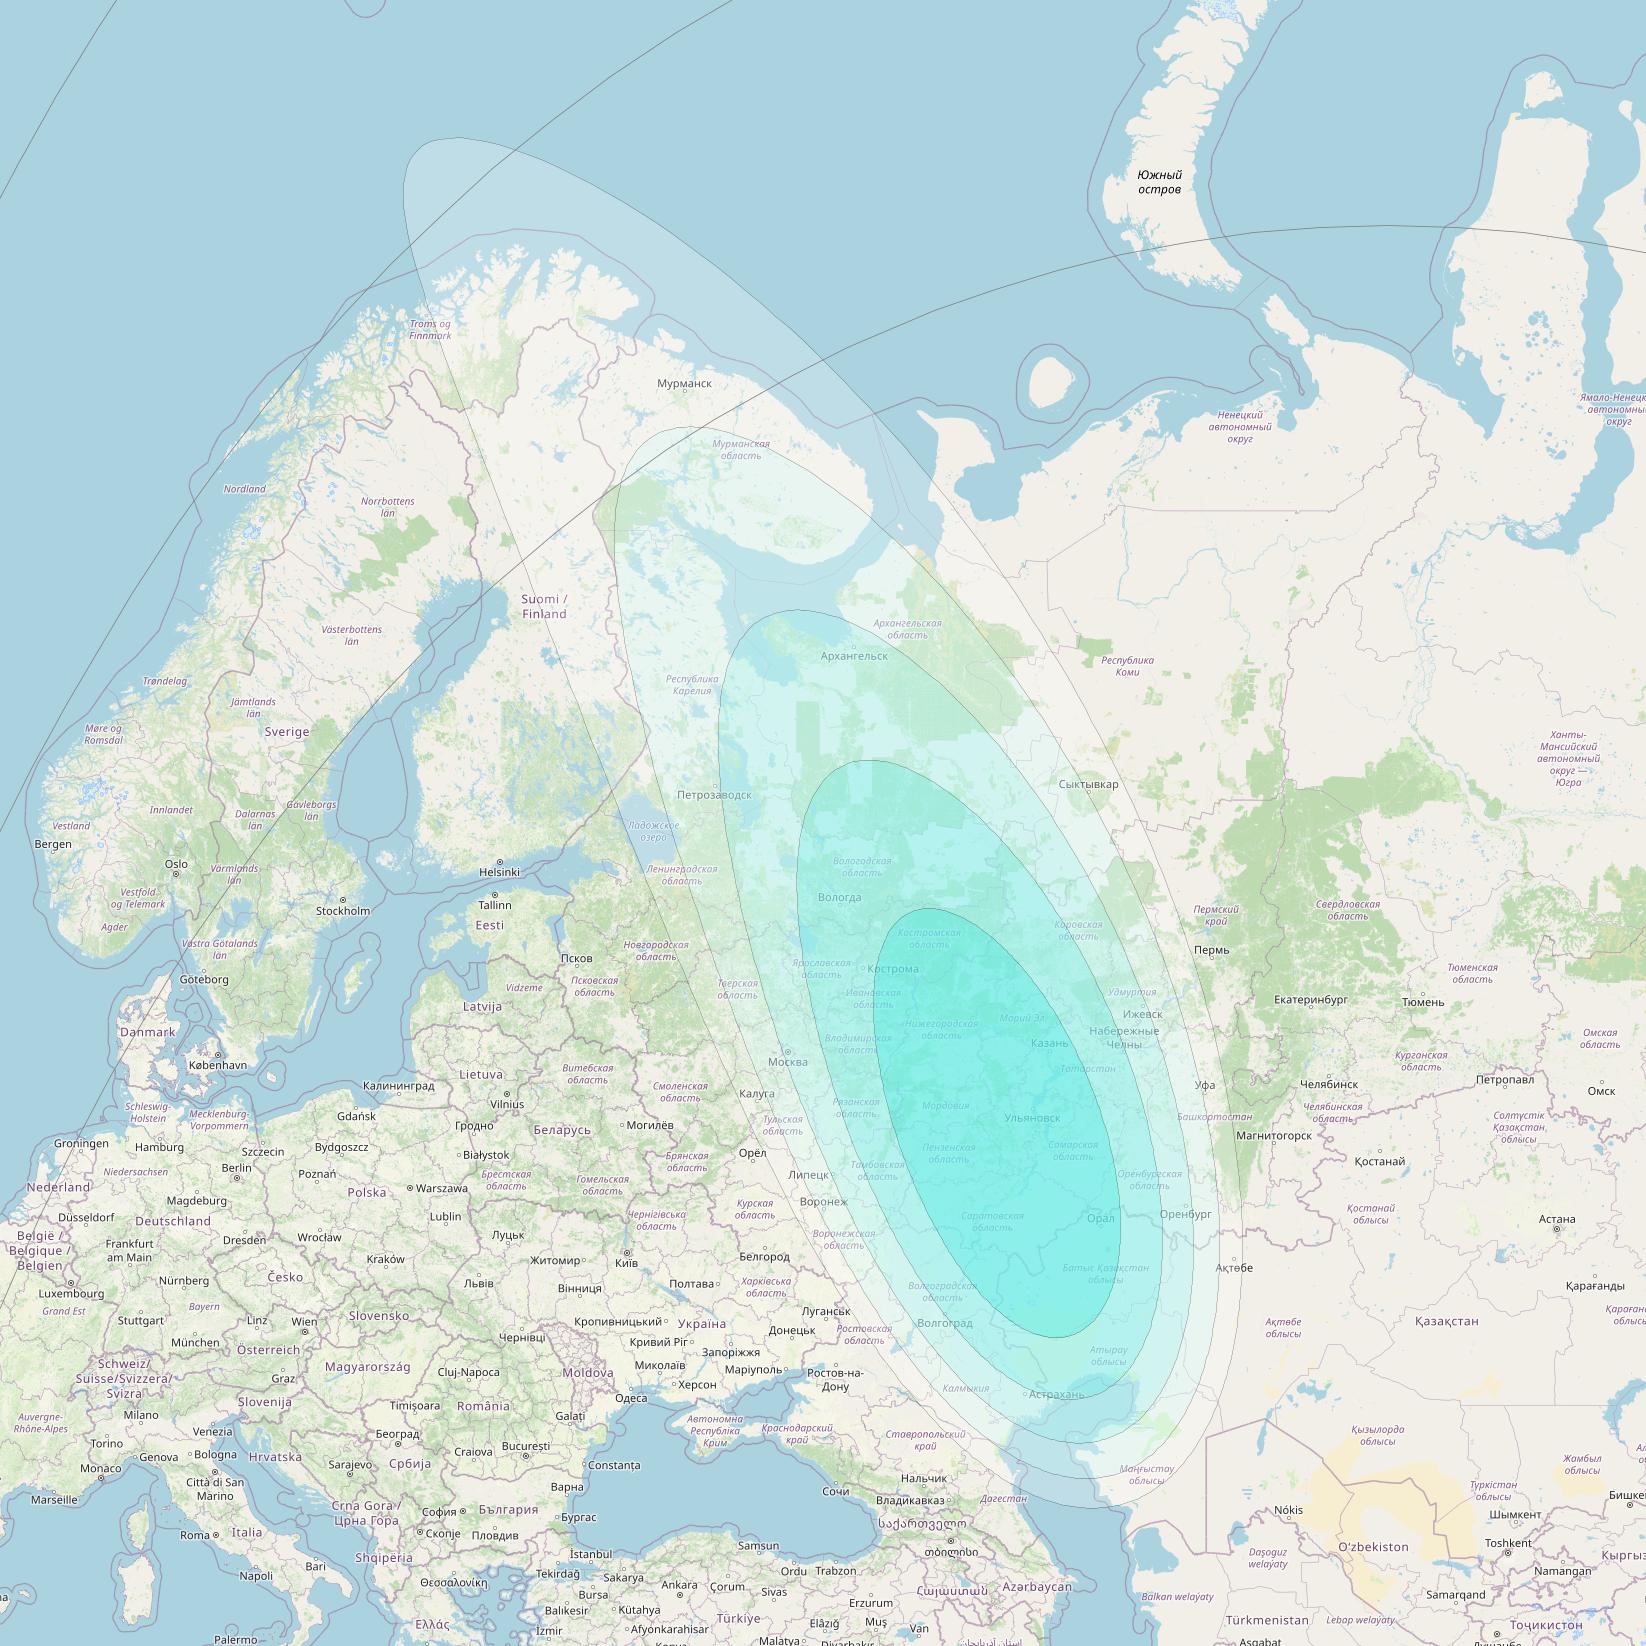 Inmarsat-4F2 at 64° E downlink L-band S081 User Spot beam coverage map